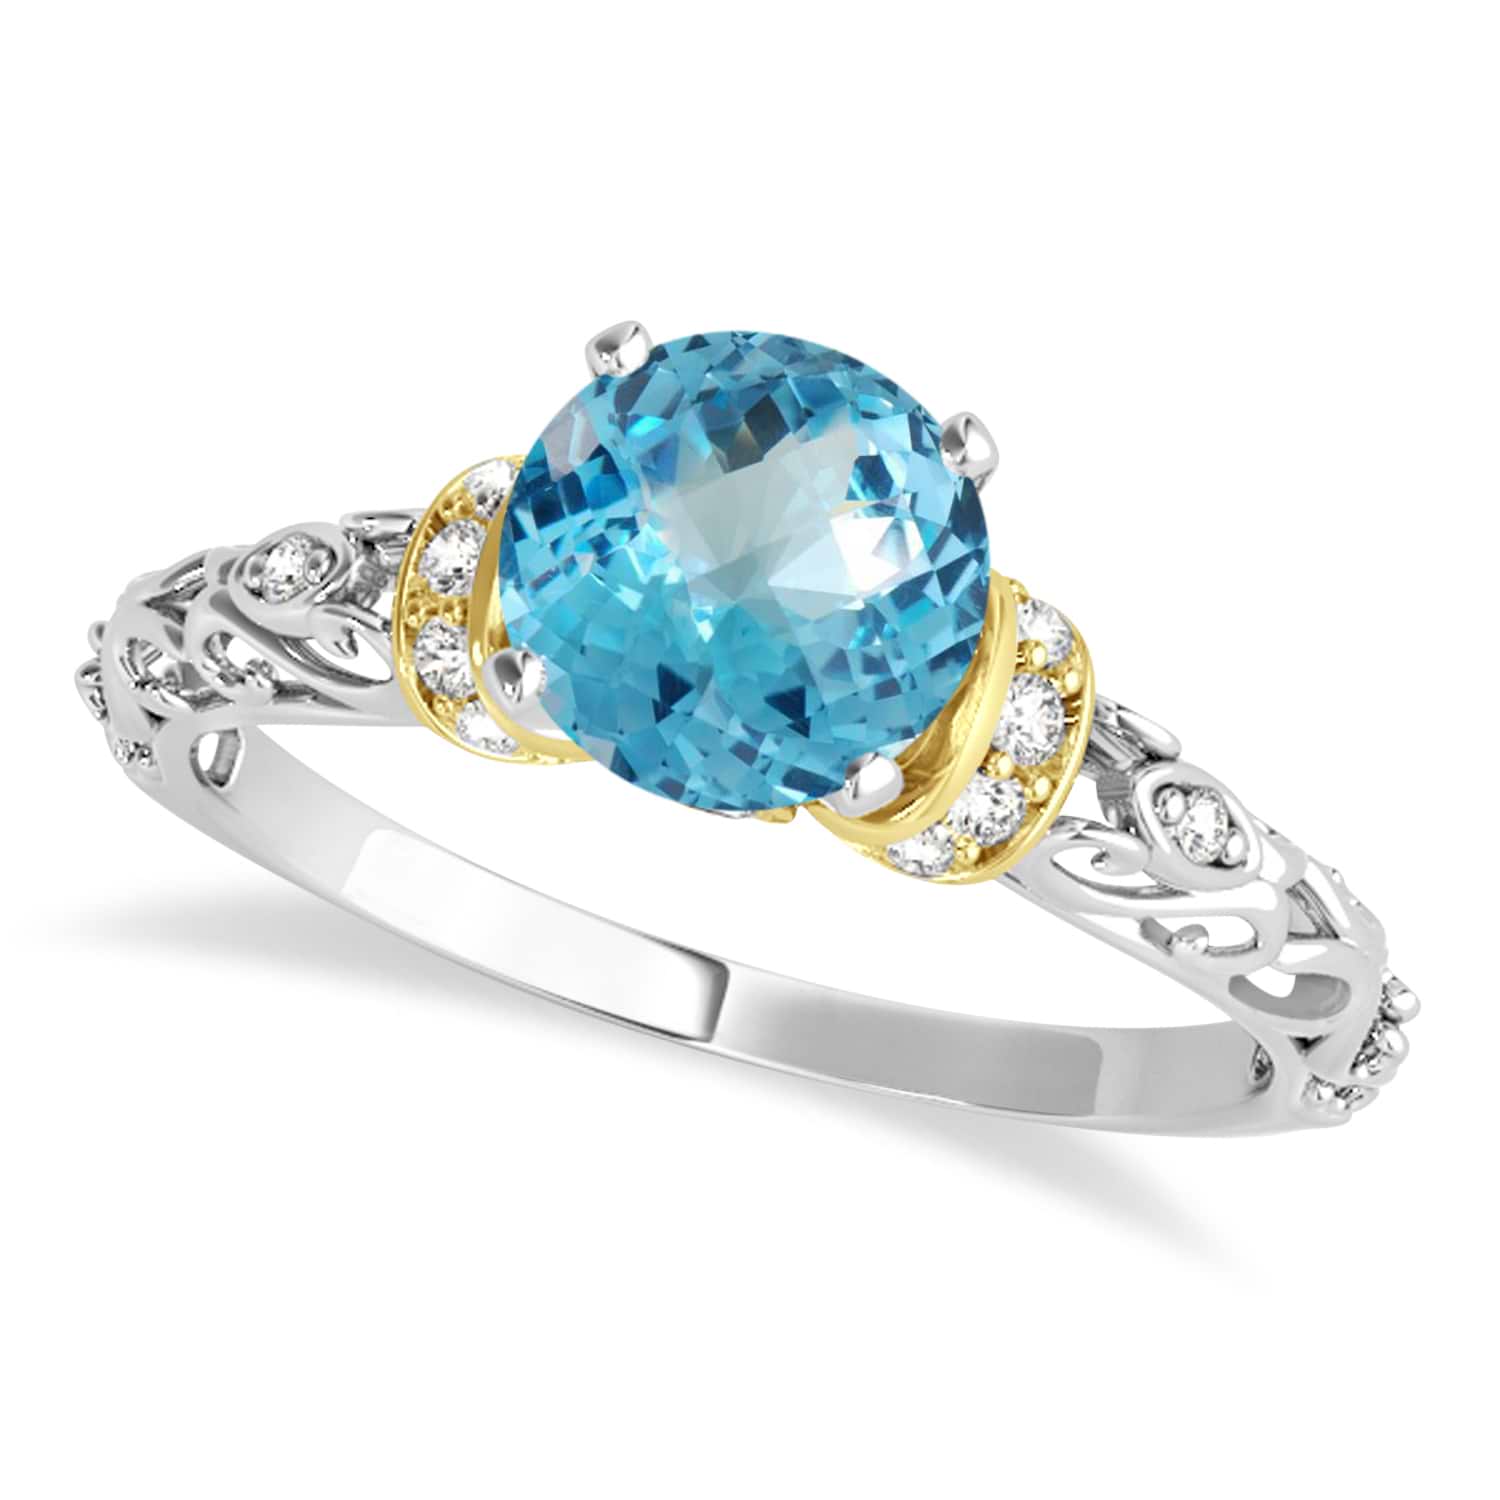 Blue Topaz & Diamond Antique Style Engagement Ring 14k Two-Tone Gold (0.87ct)